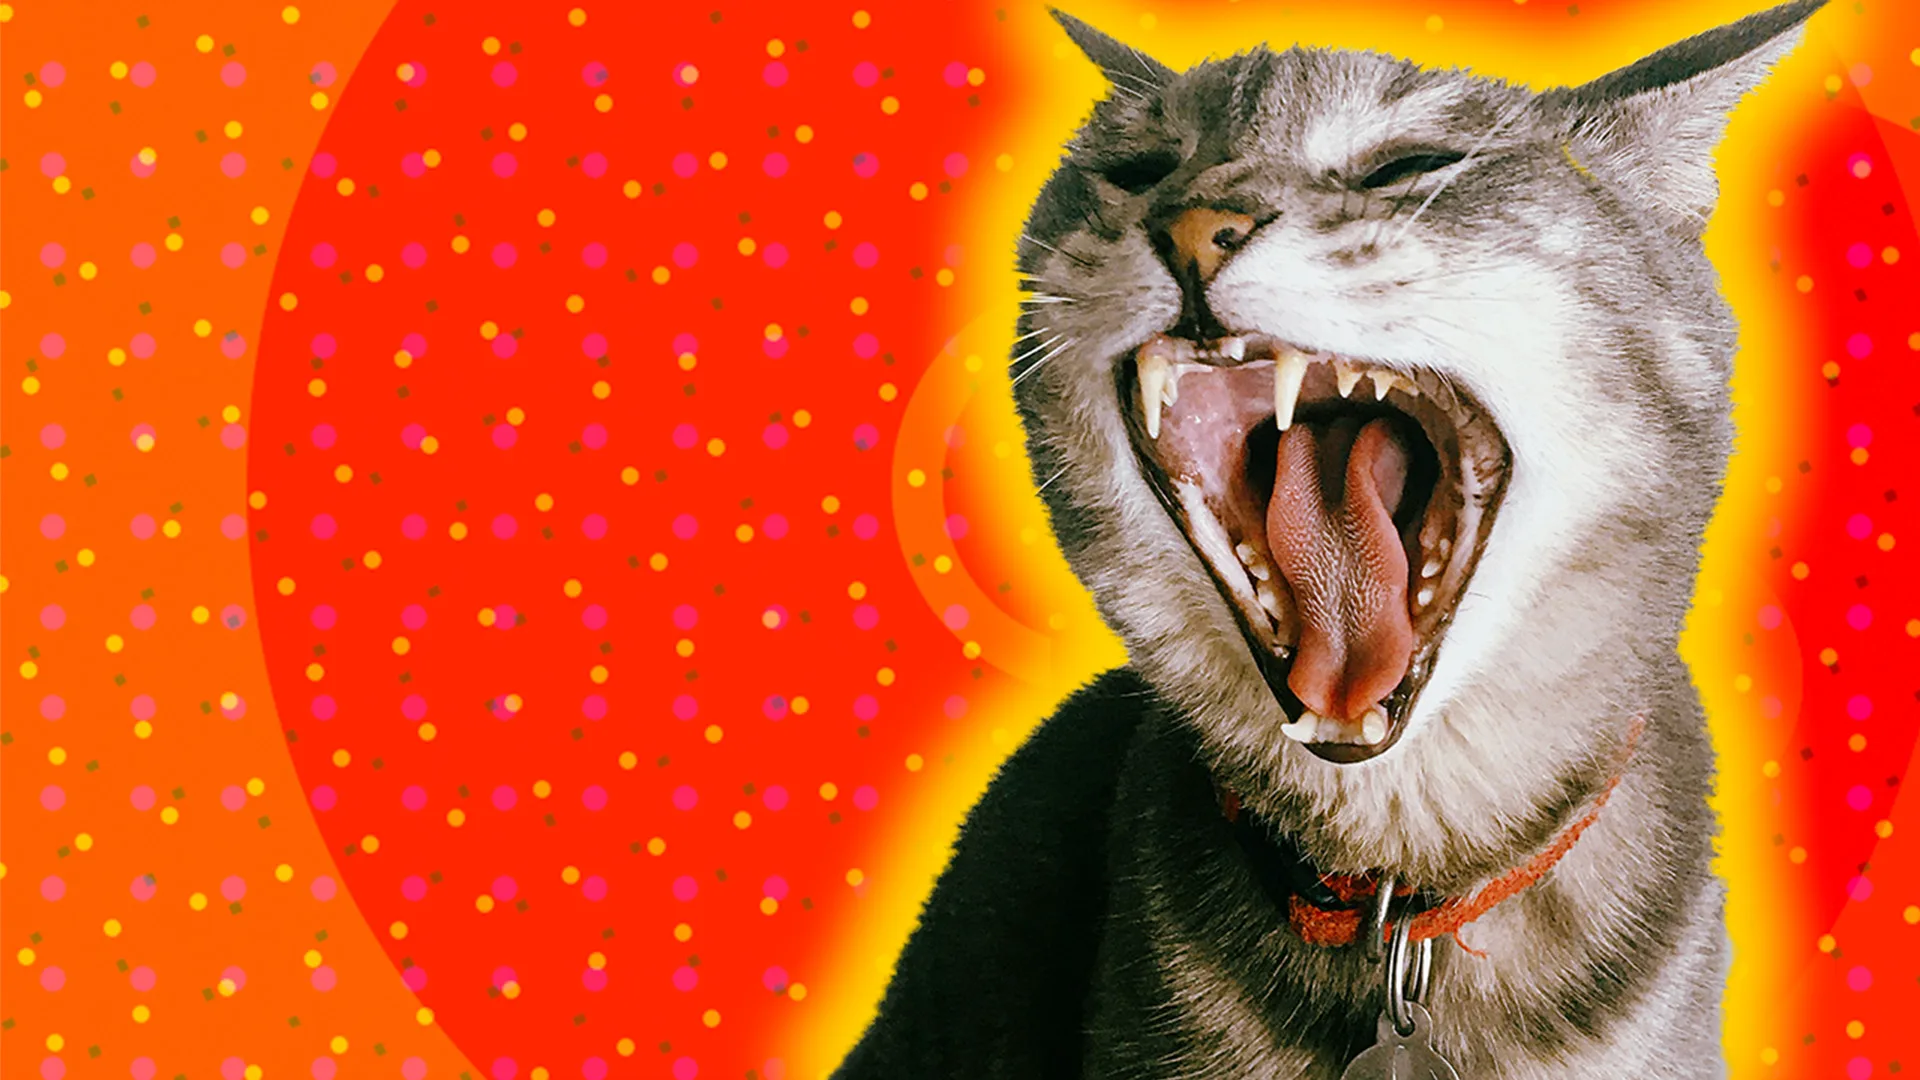 Screaming cat in graphic house style